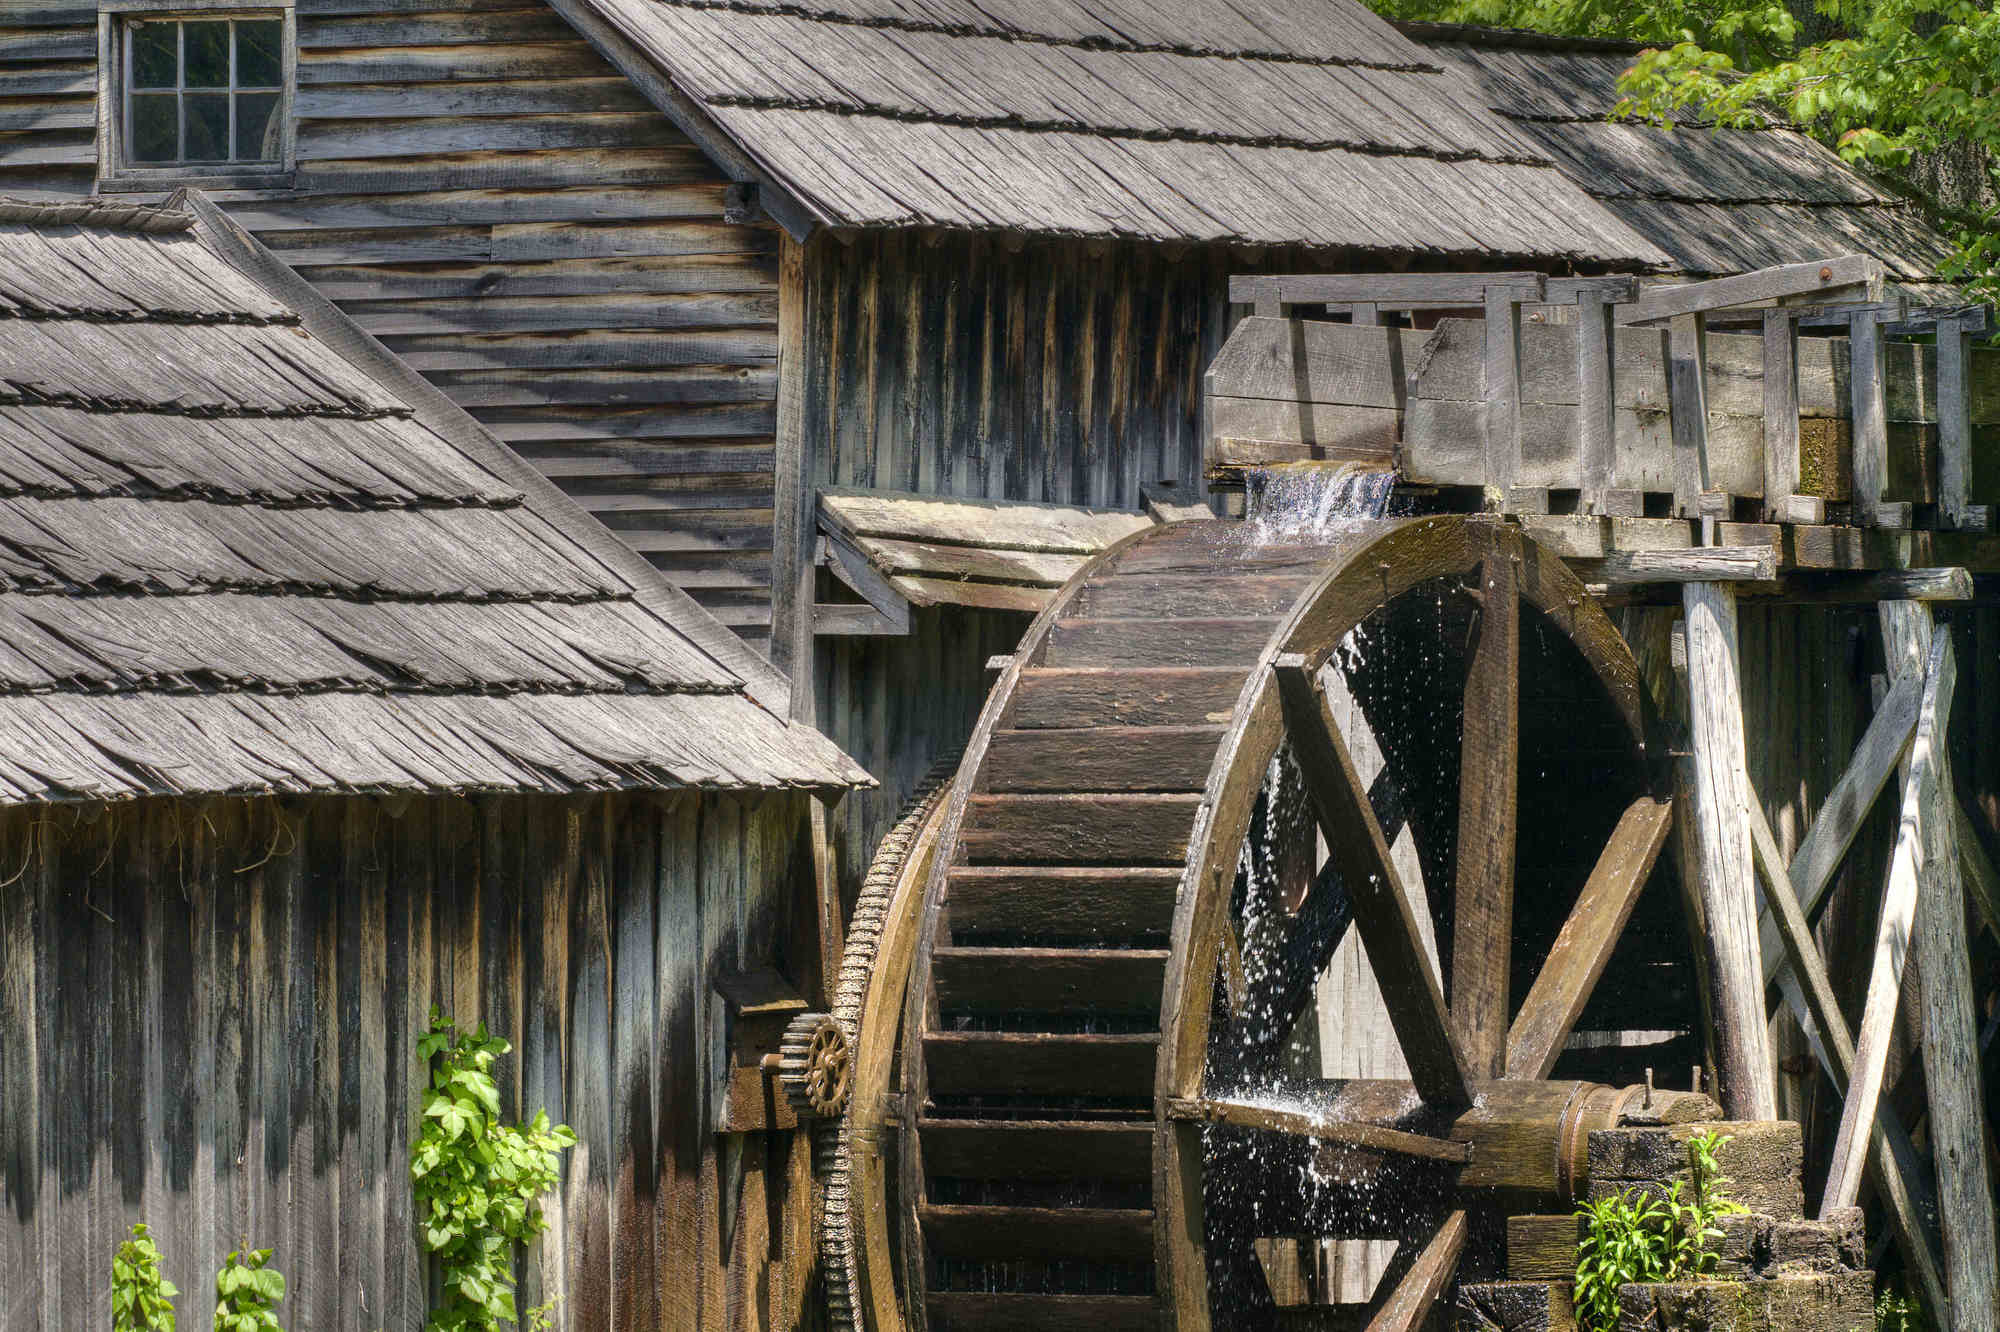 Water from a worn wooden aqueduct spills over the top of the wooden wheel at Mabry Mill on the Blue Ridge Parkway.